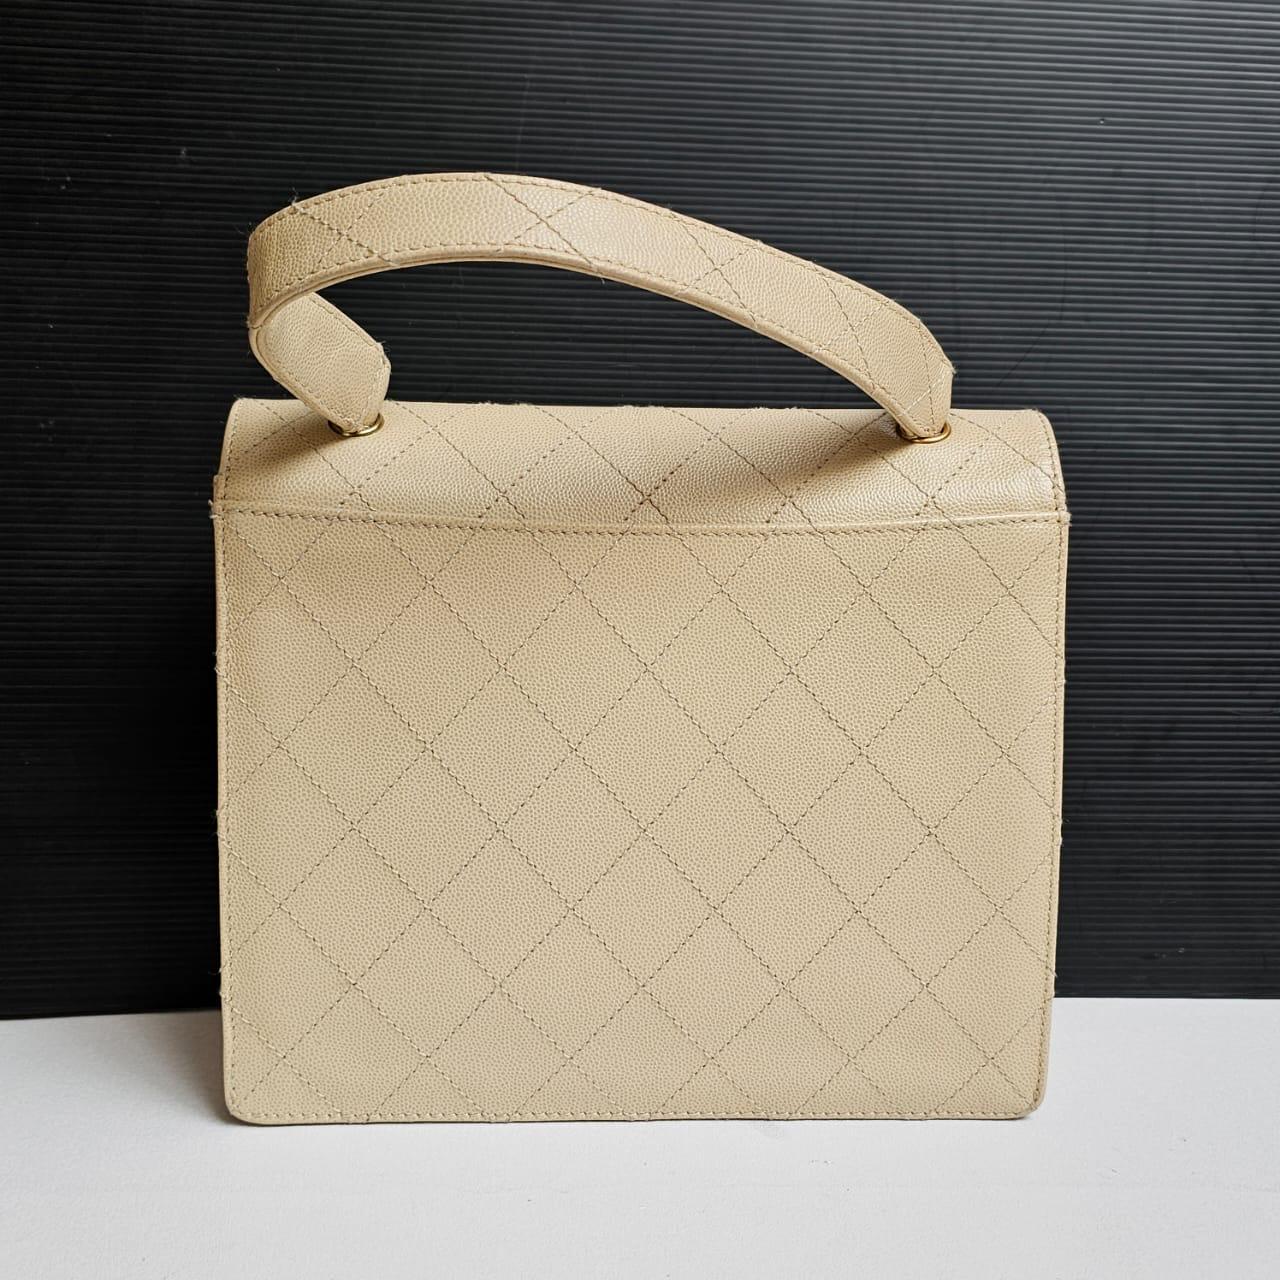 Beautiful vintage top handle bag in light beige caviar. Very good vintage condition overall as seen on pictures. Series #5. Comes with its holo sticker and replacement dust bag.